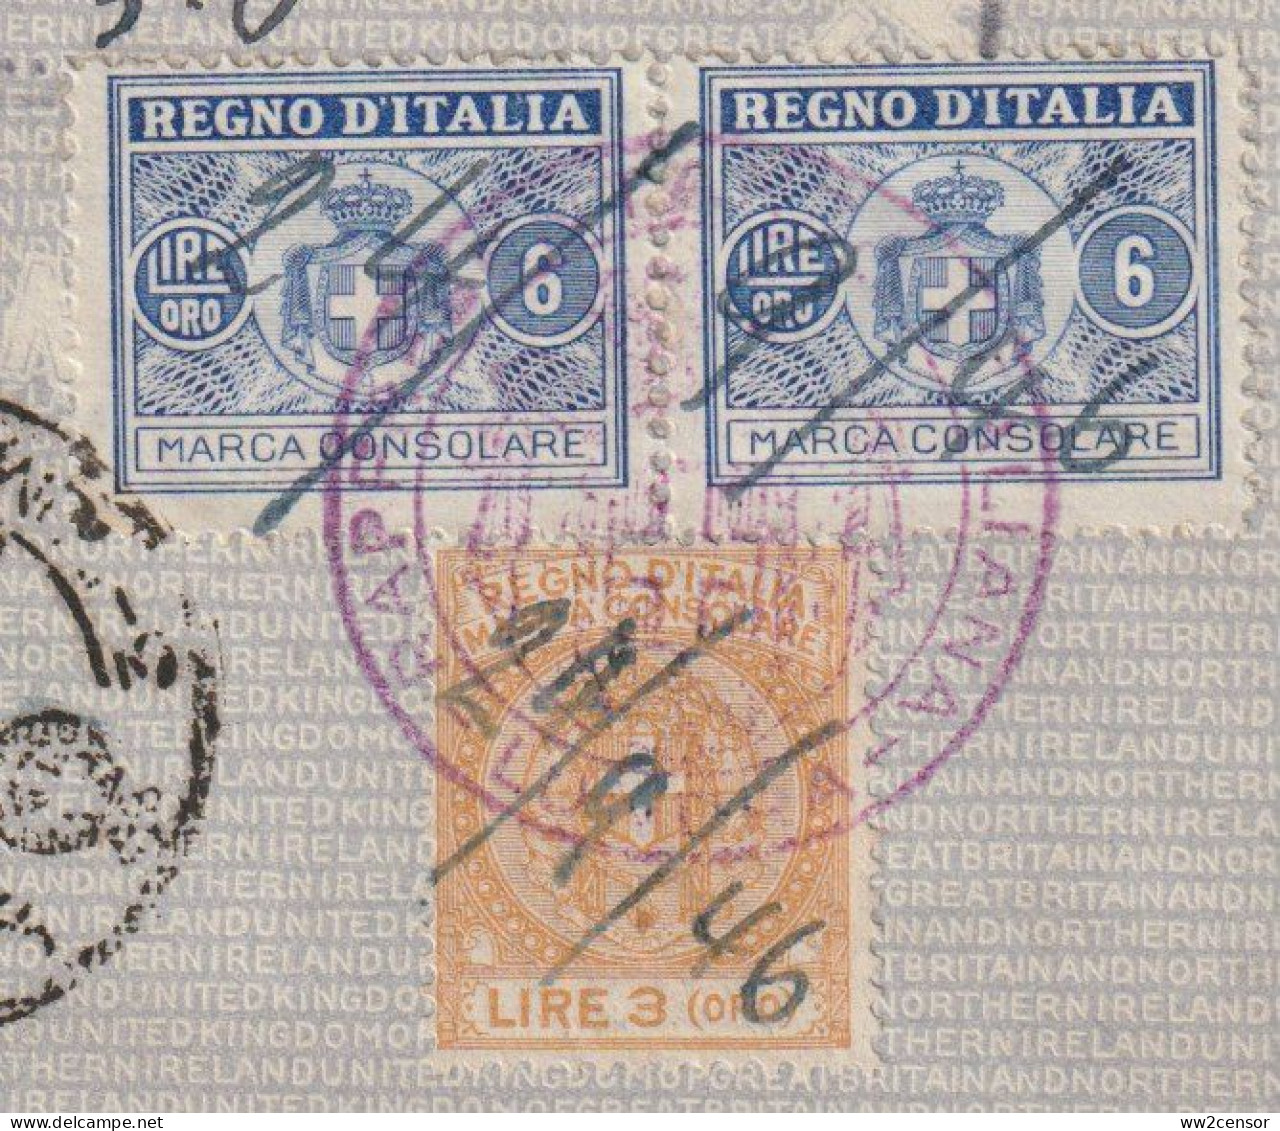 Italy 1946 - Italian Fiscal Revenue Stamps On A Visa On A Passport Page - Fiscali